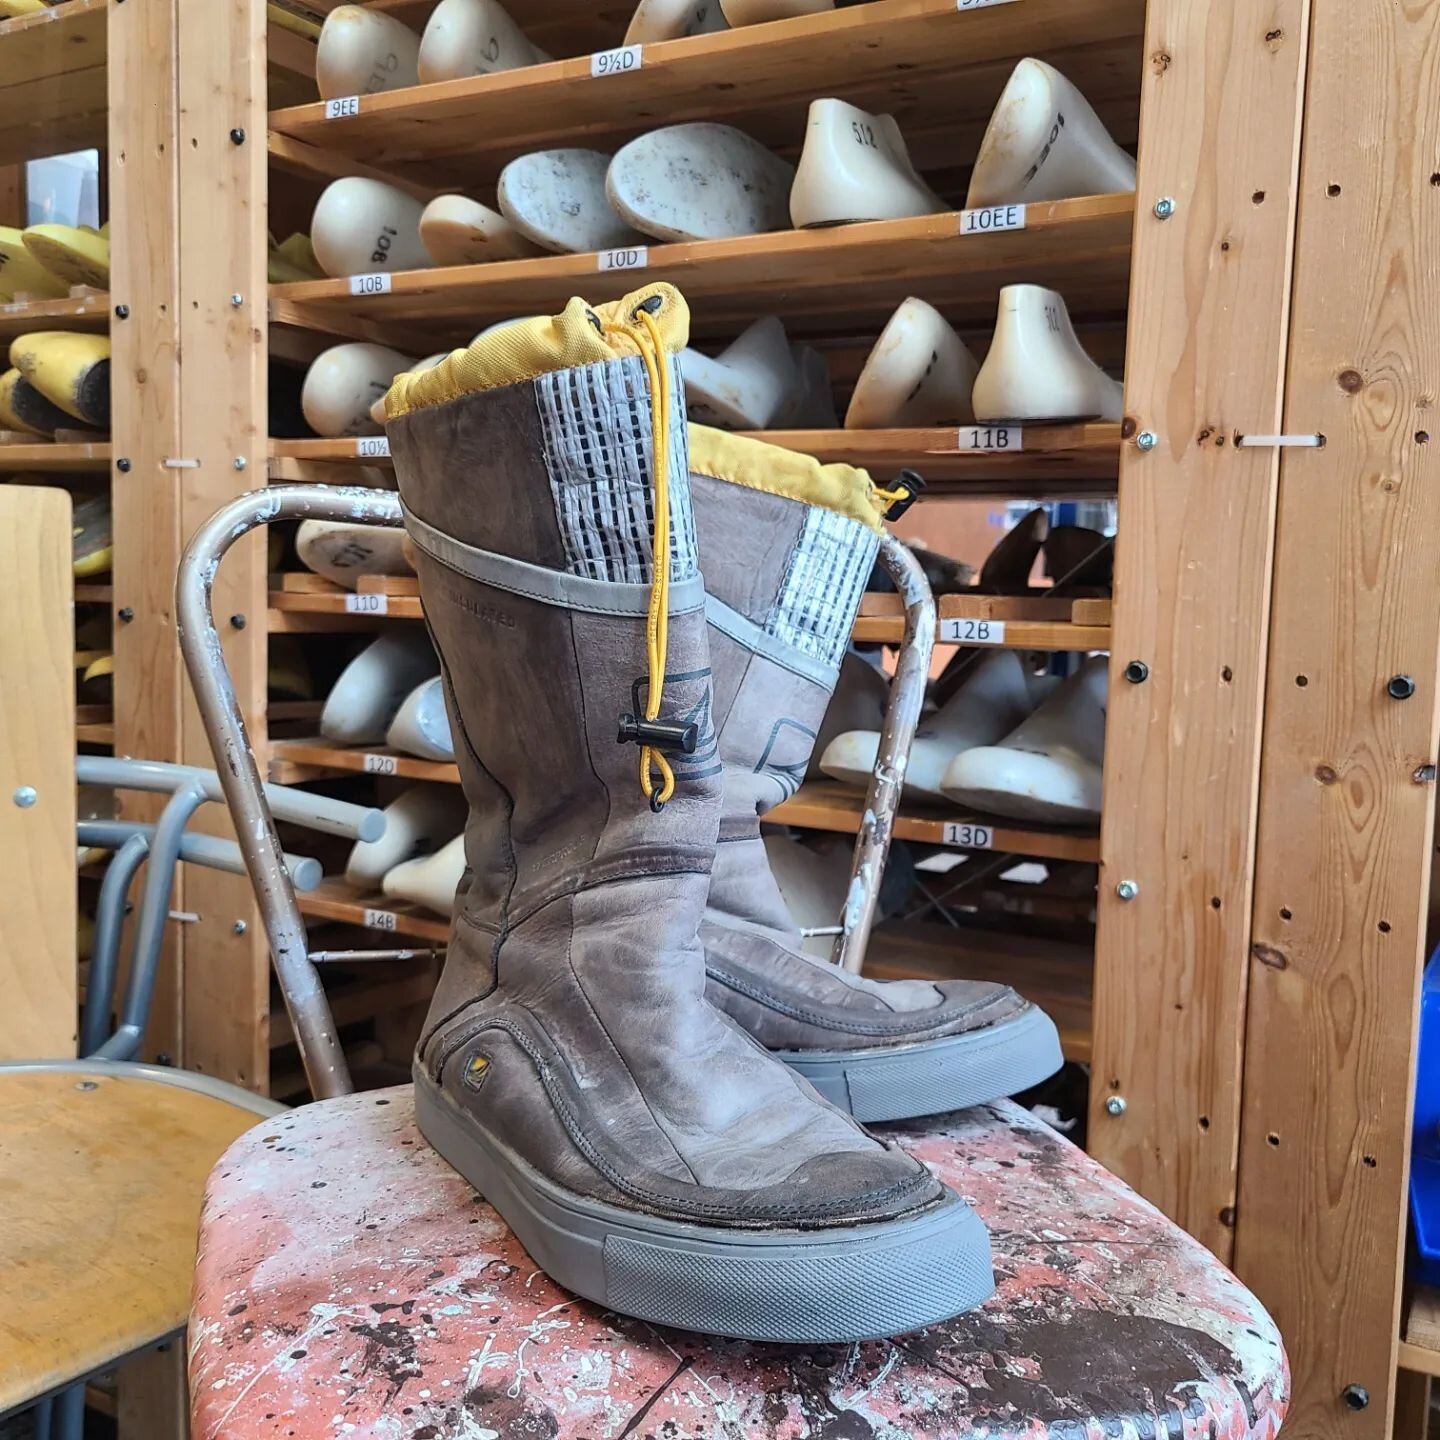 Converted some Deck Boots to Margom Cup Soles! The old soles had lived their long lives and started to crumble away. We typically sew these soles through the uppers, but in this case we used a special liquid rubber sealant that will waterproof the ed